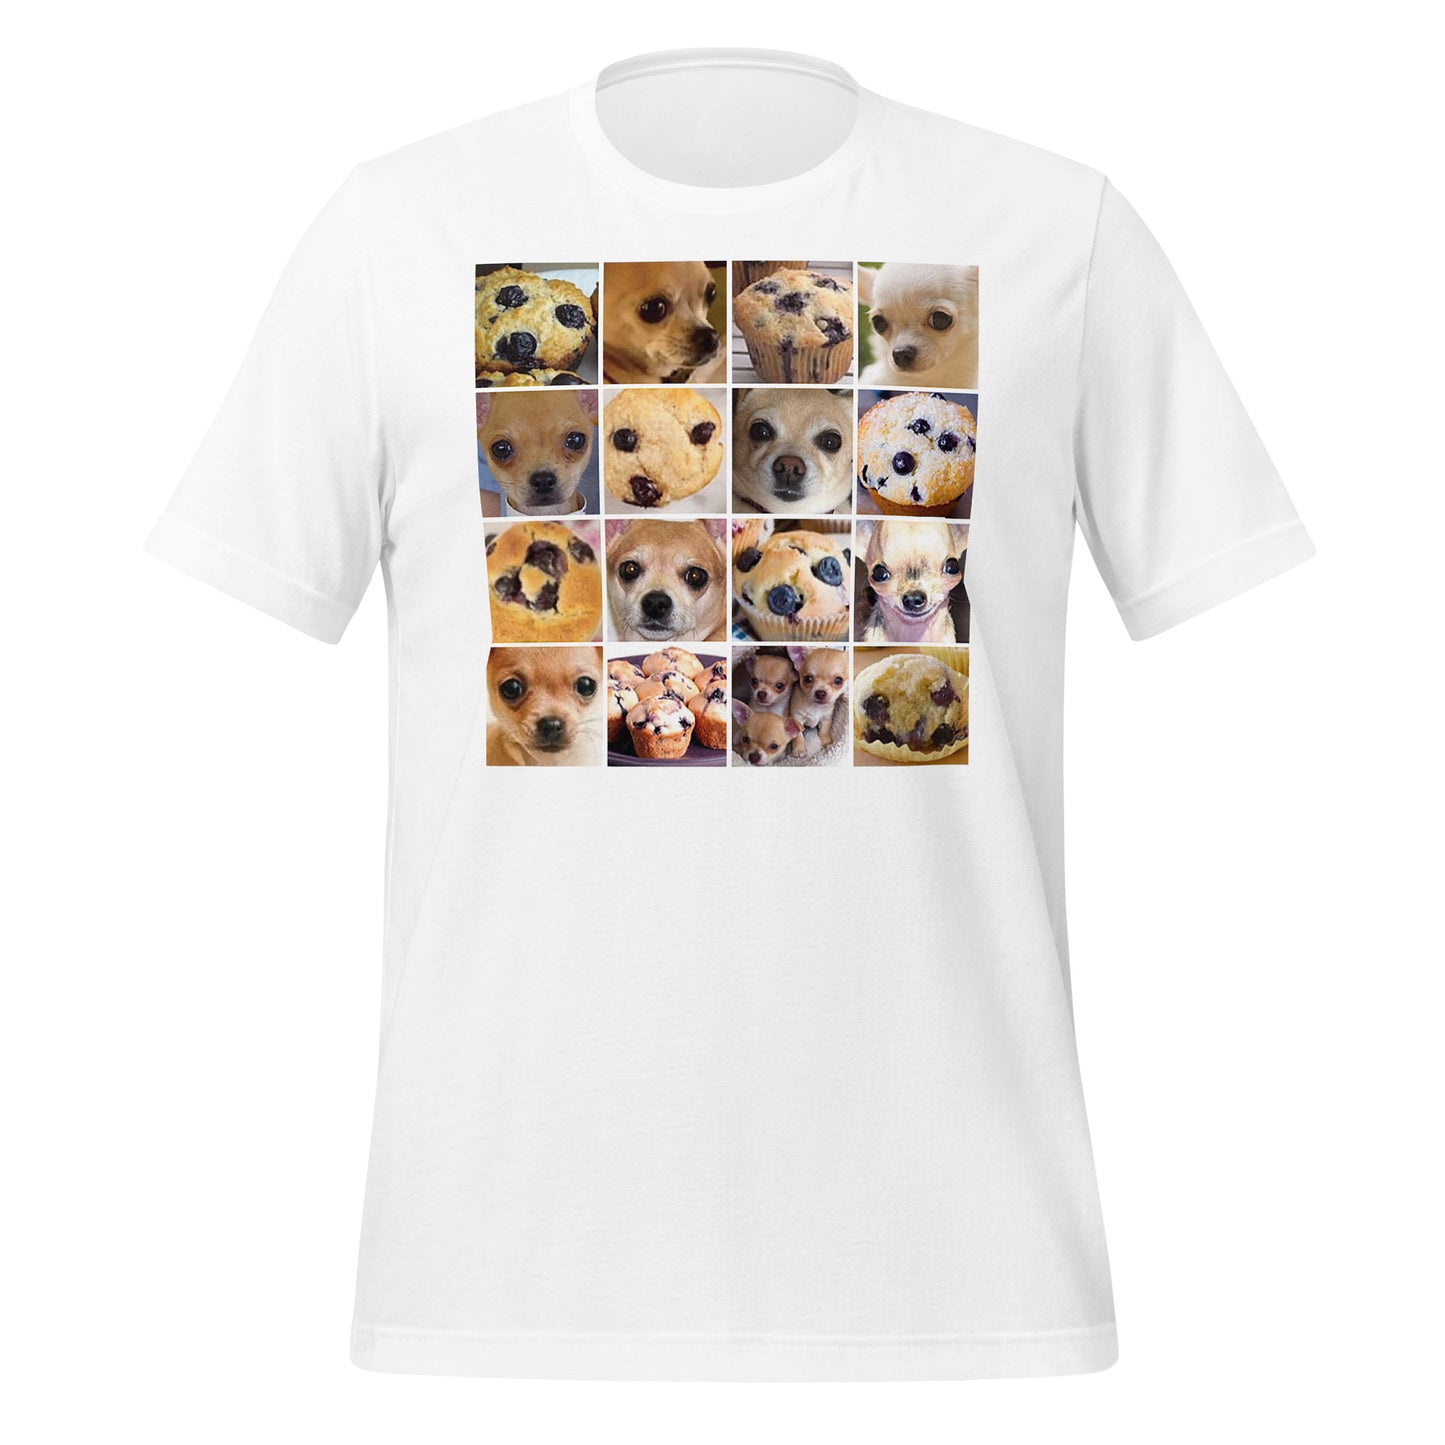 Is it a Blueberry Muffin or is it a Chihuahua? T-Shirt (unisex)